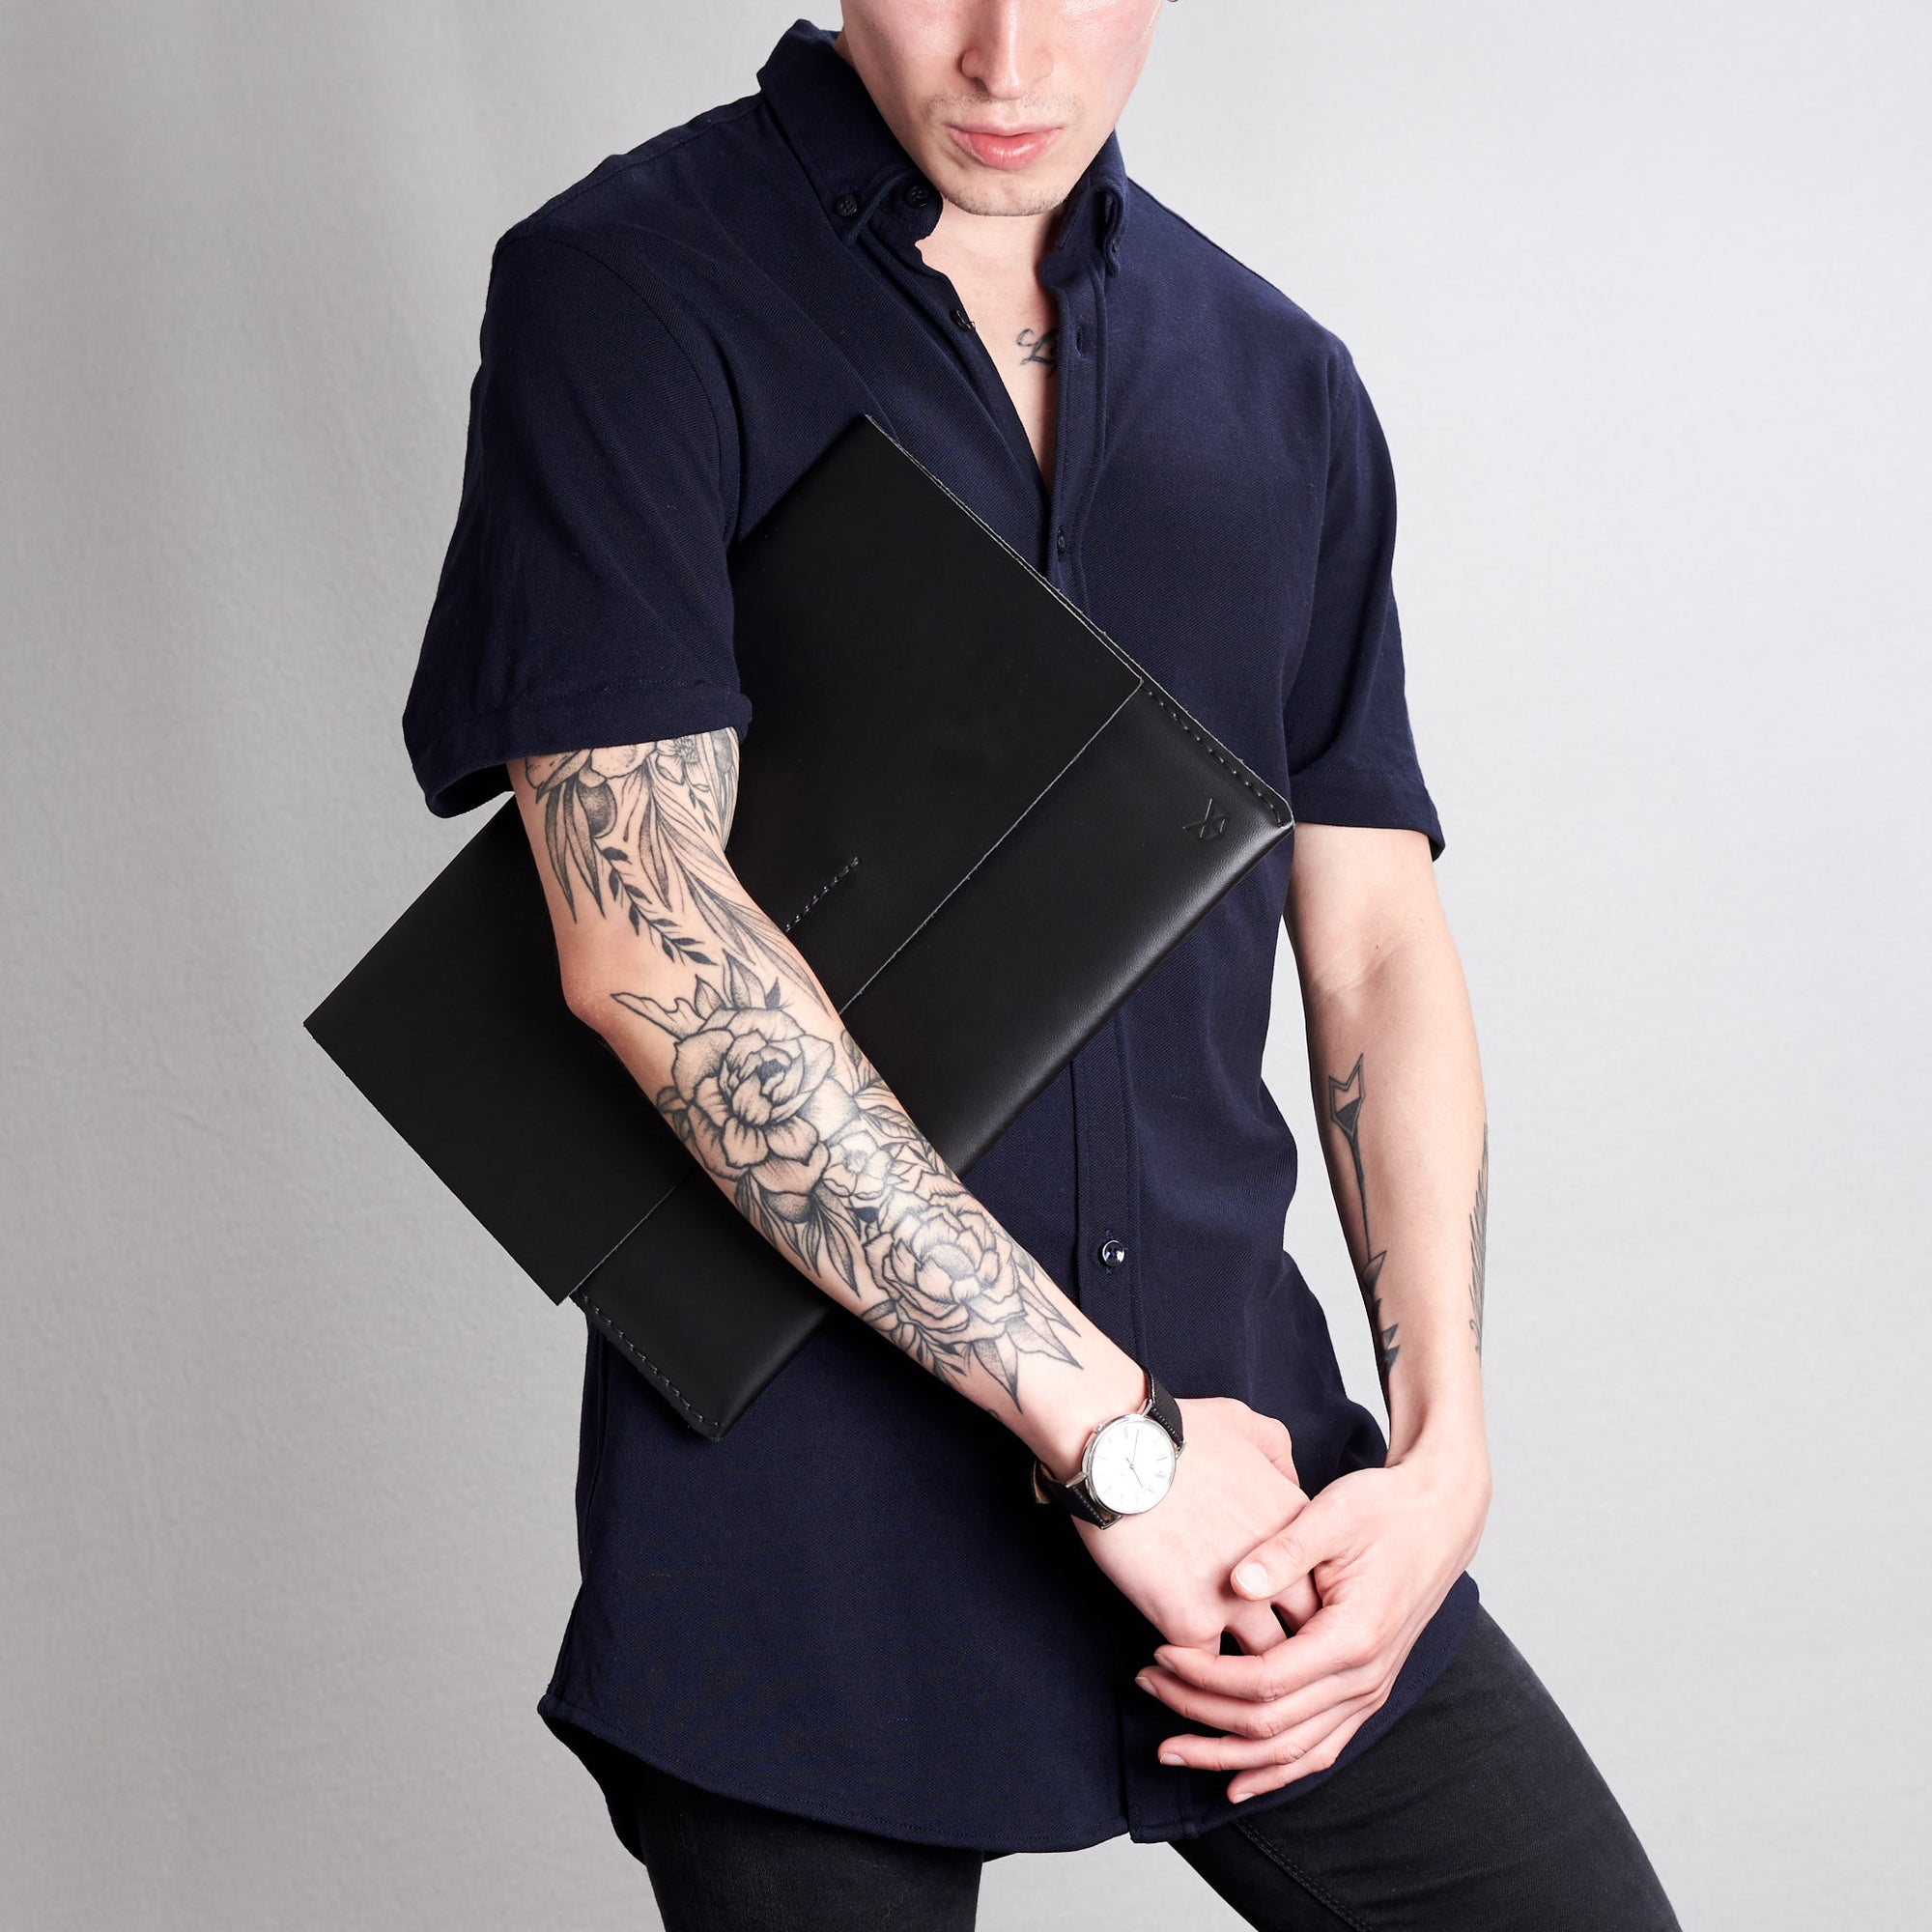 Style holding case by model. Black draftsman 1 case by Capra Leather. ZenBook sleeve.